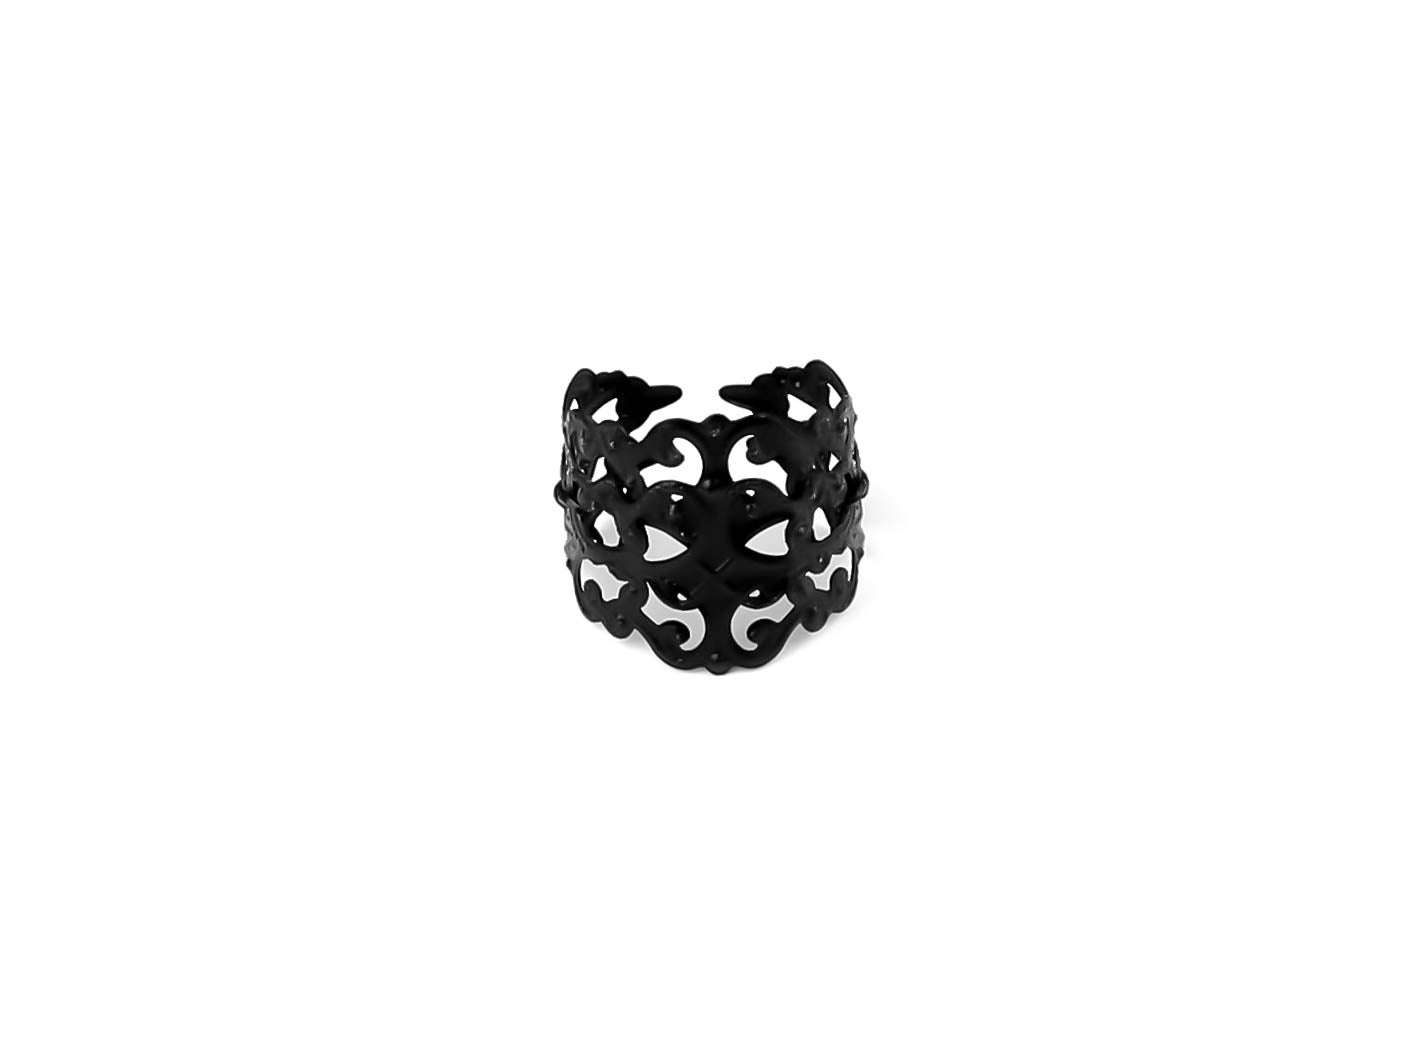 Delve into the dark elegance of Myril Jewels with this exquisite handcrafted black ring, perfect for those who cherish dark-avantgarde and gothic-chic styles. Its intricate design is reminiscent of Neo Gothic artistry, making it an ideal accessory for Halloween, Witchcore ensembles, or as a distinctive touch to everyday wear for lovers of the Punk and Whimsigoth aesthetics.